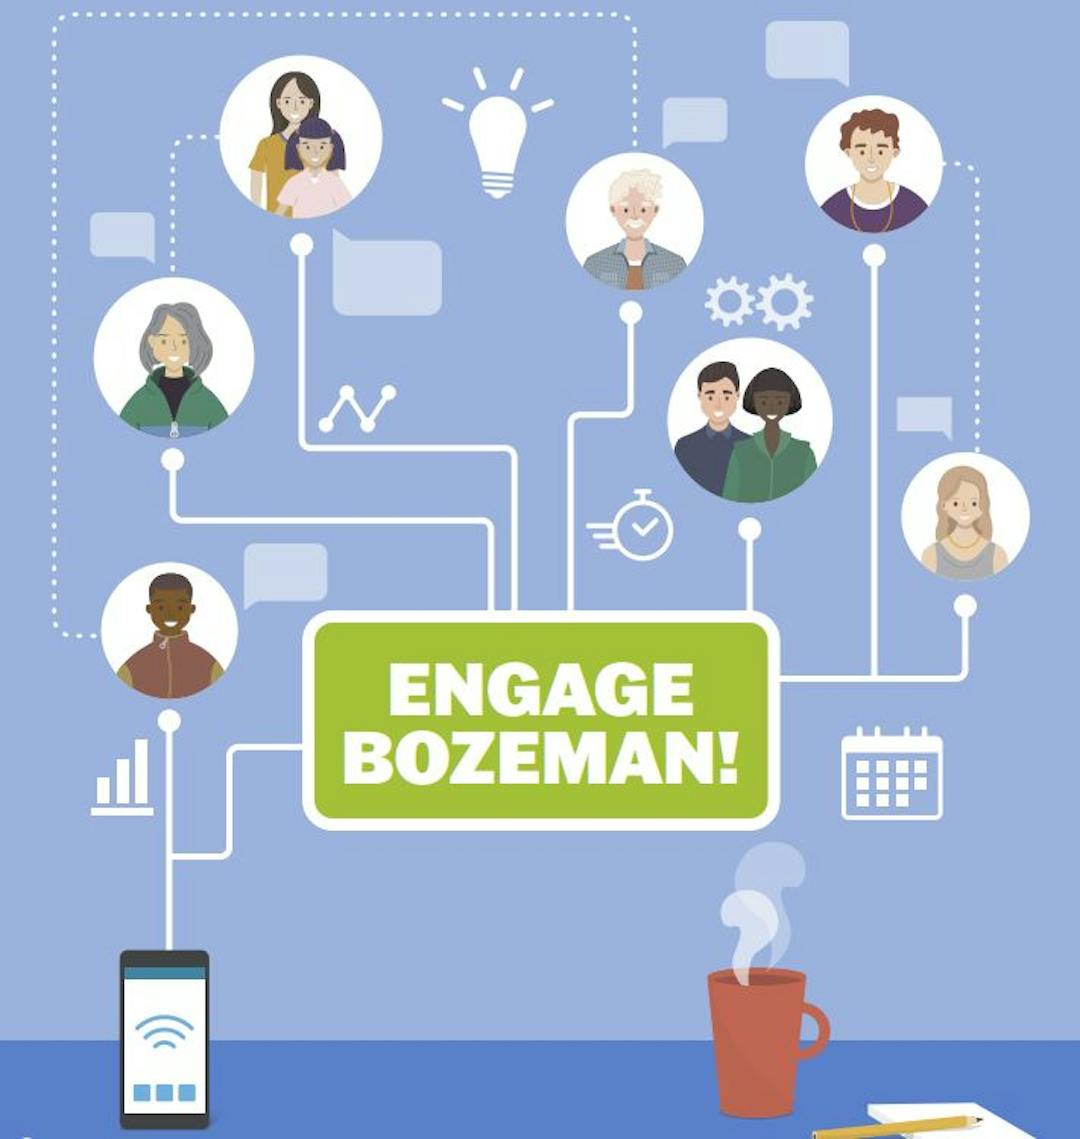 The cover of the Engage Bozeman document, illustrations of people, and symbols of speech bubbles, light bulbs, and a phone.